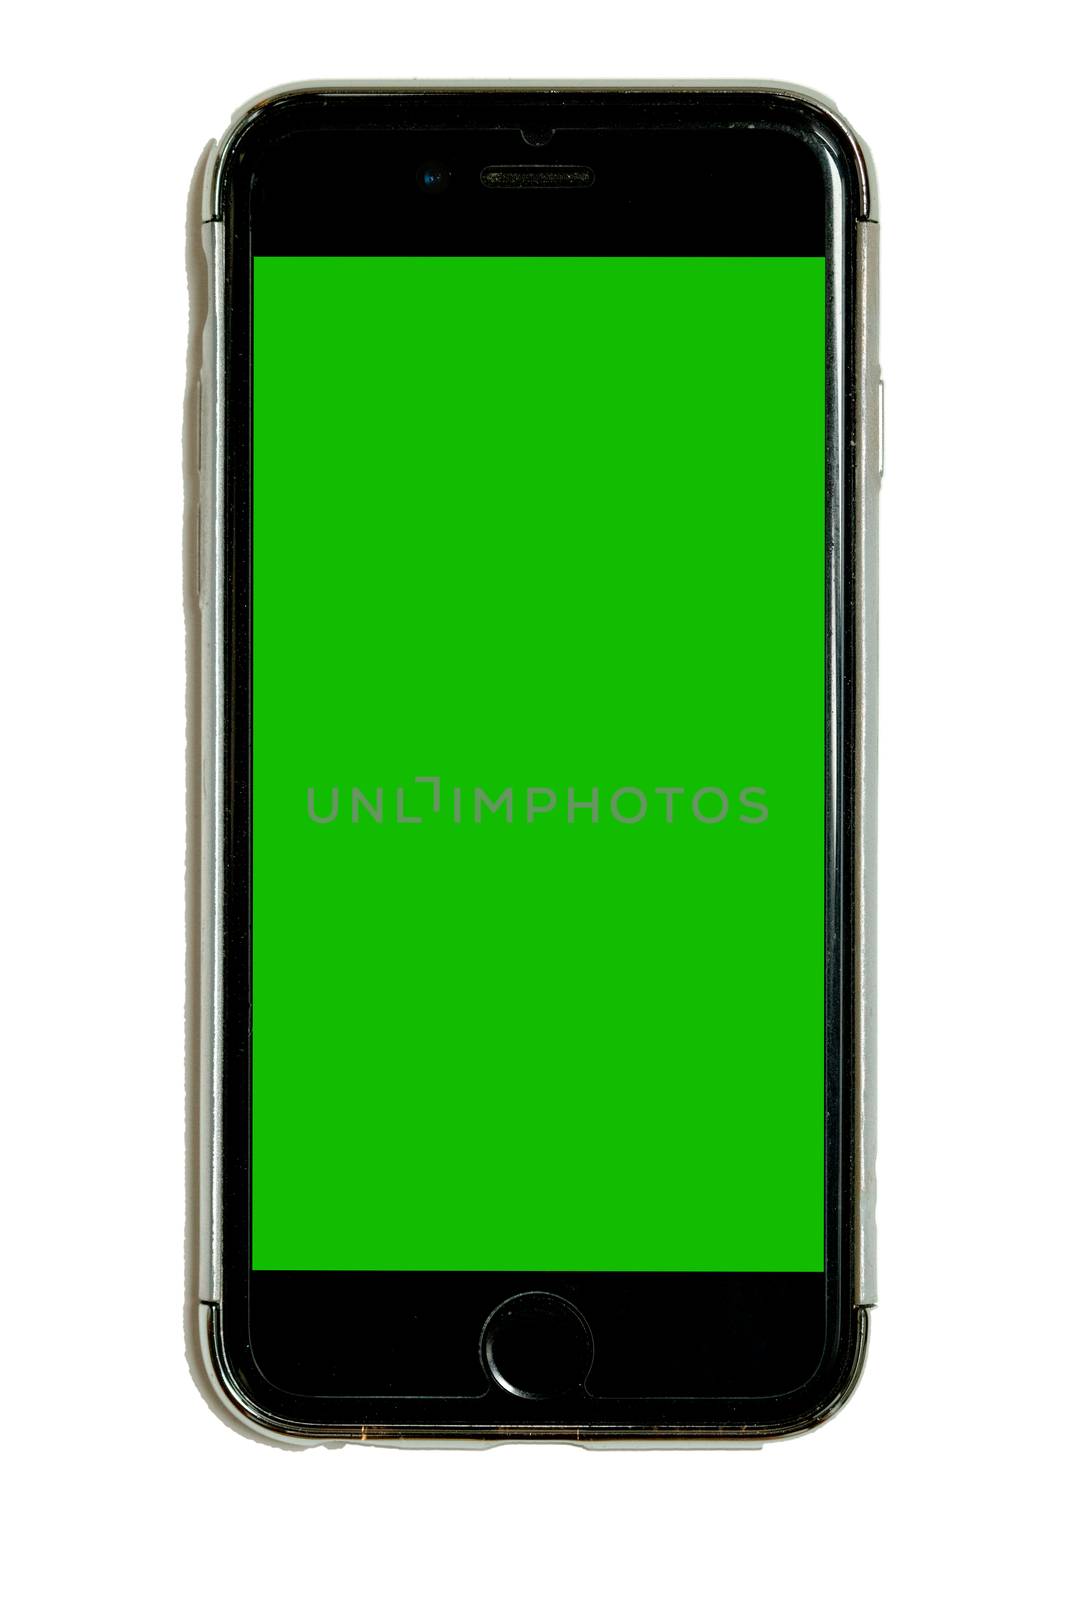 Smart phone in protective case with green chroma key touchscreen, isolated on white background by asafaric